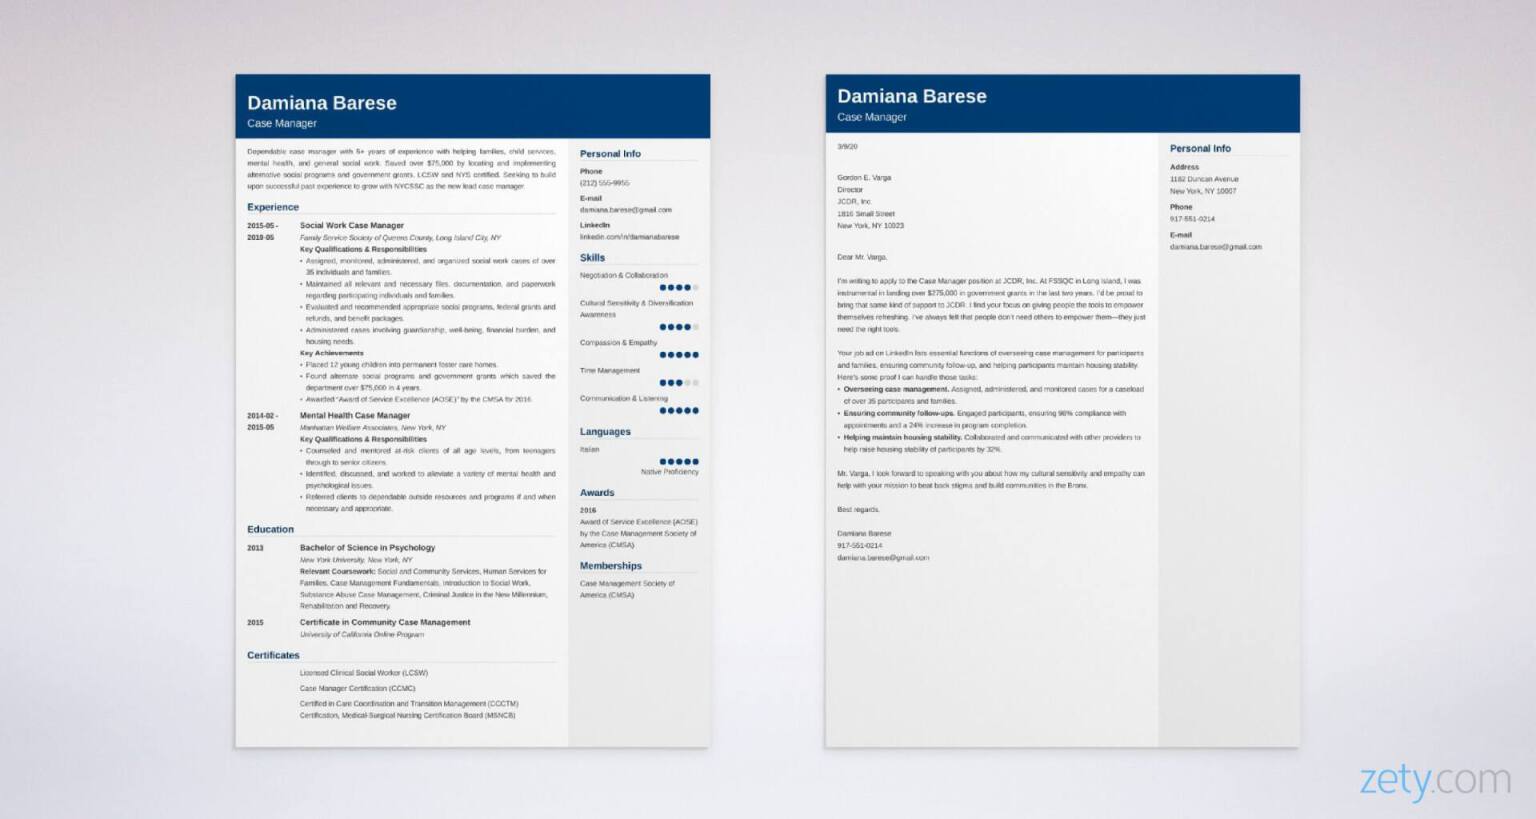 case manager resume and cover letter set